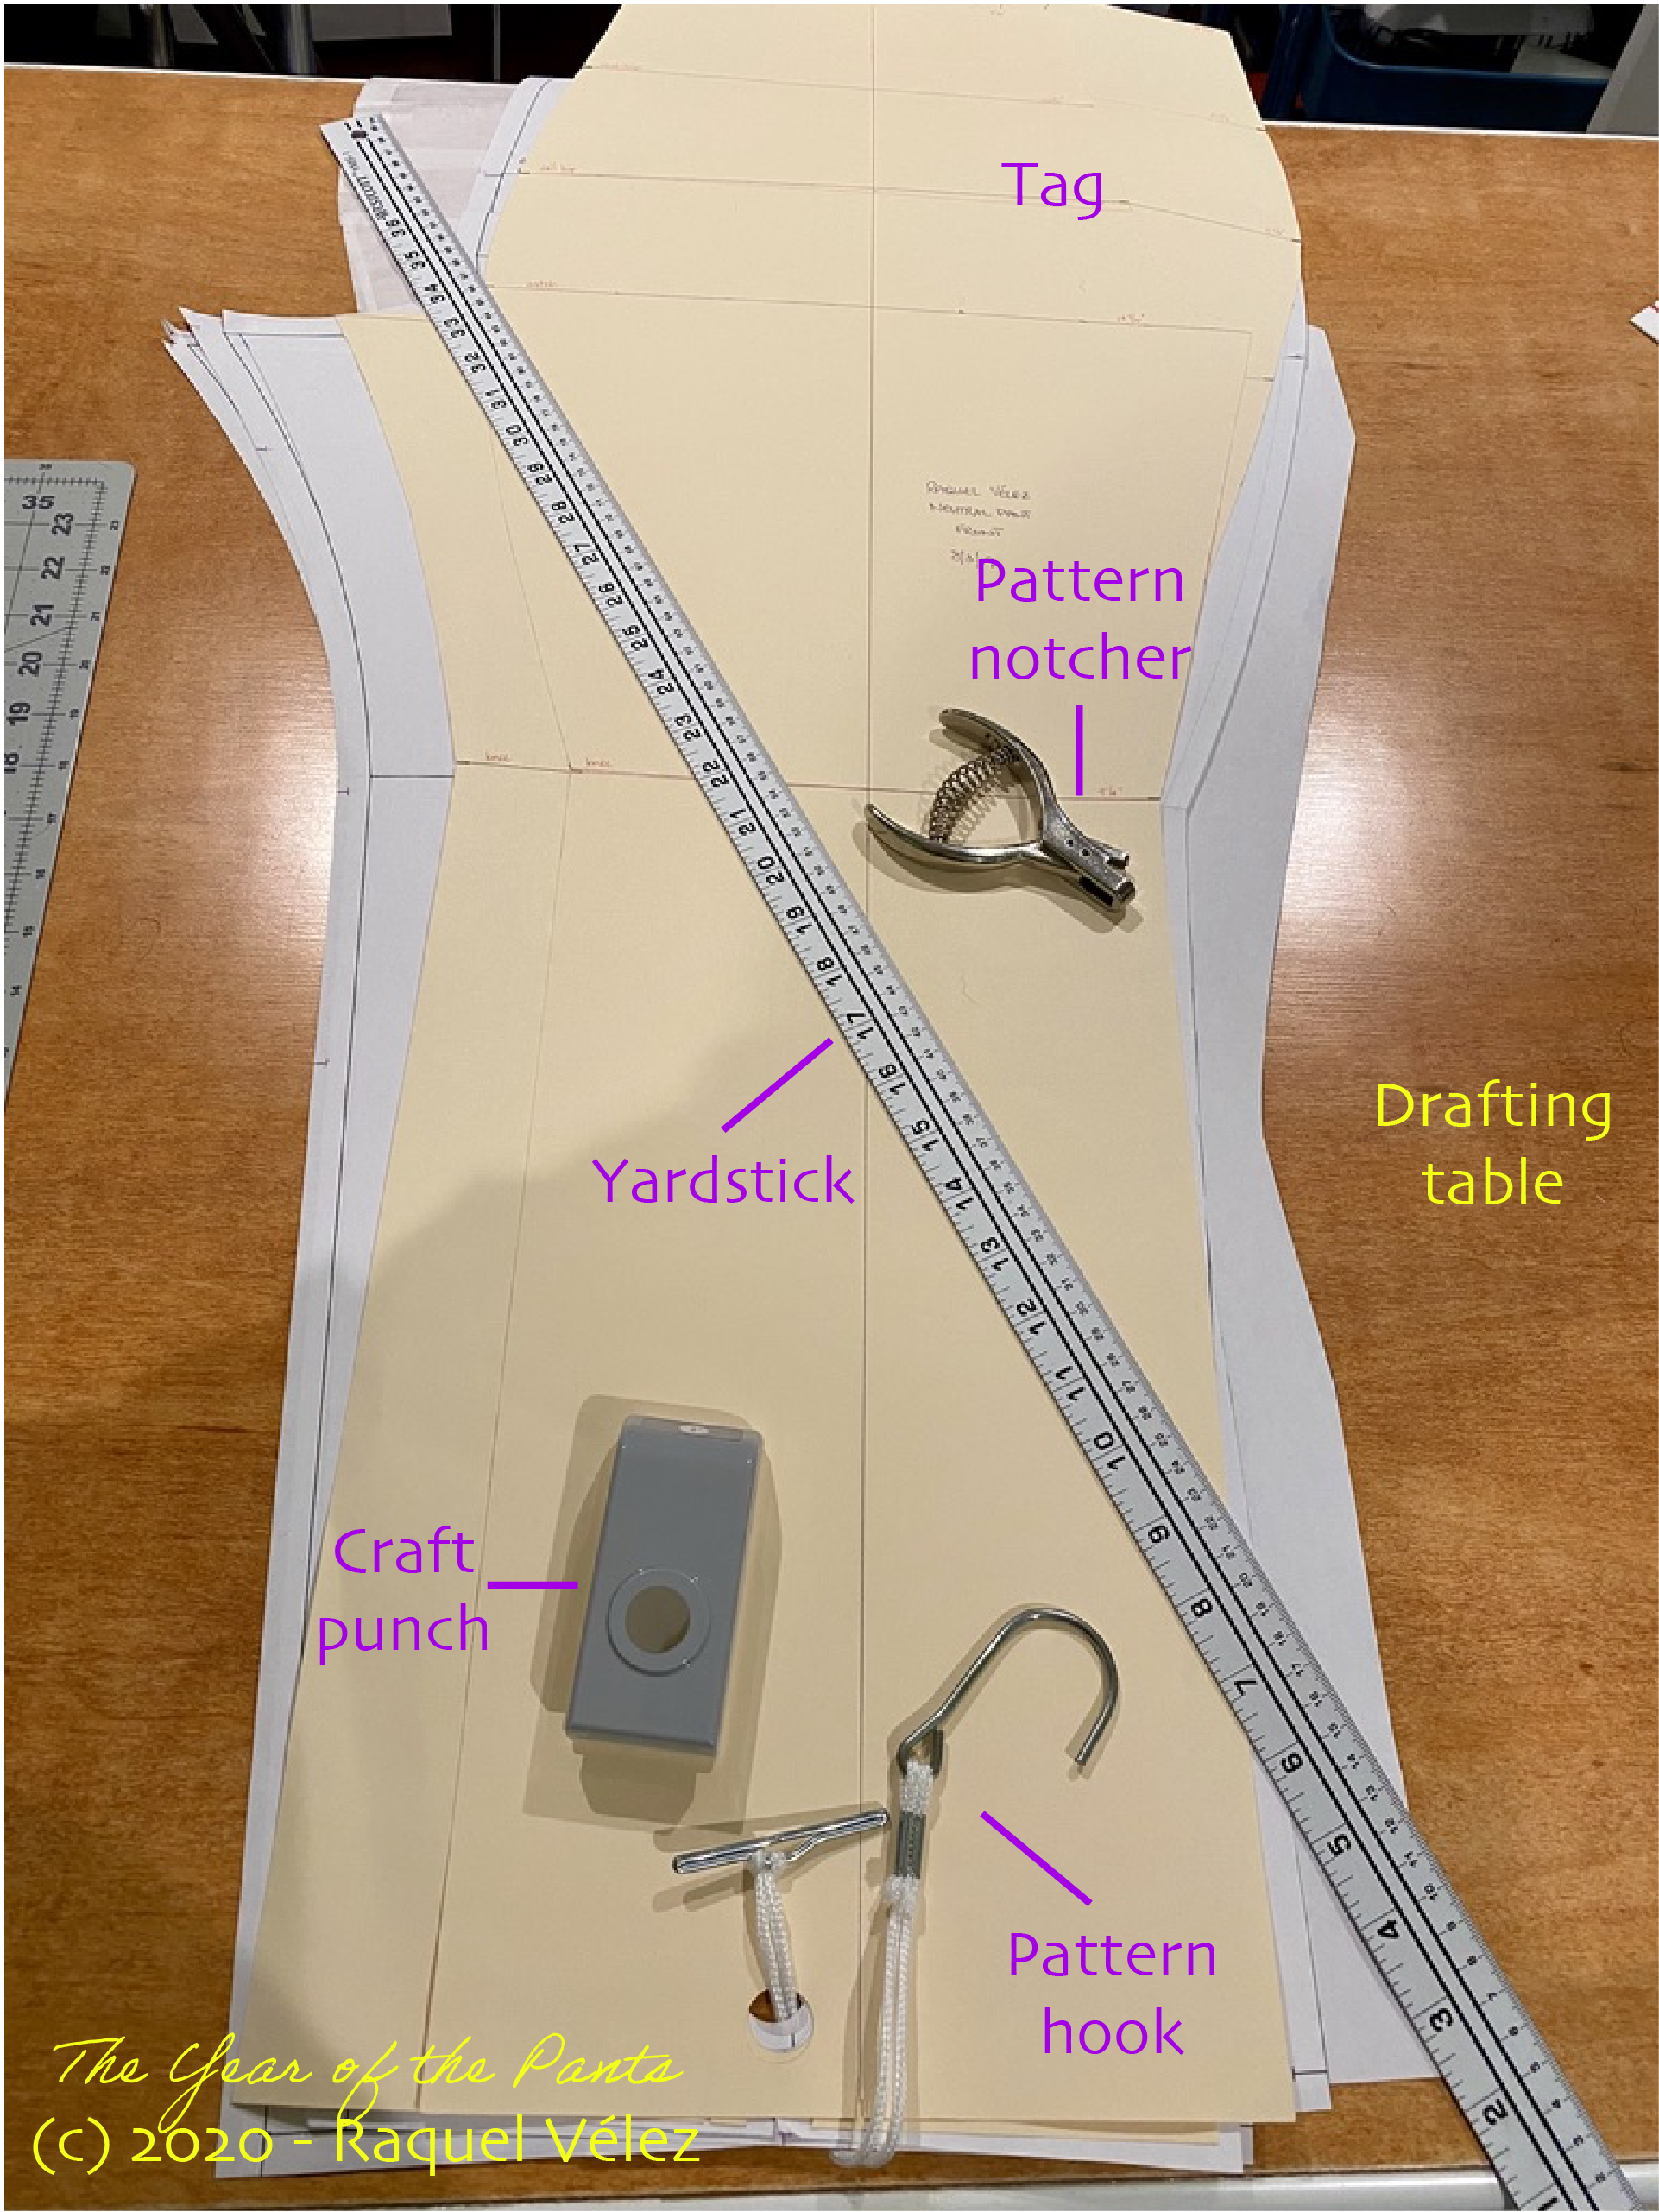 Tools of the Trade: Pattern Drafting